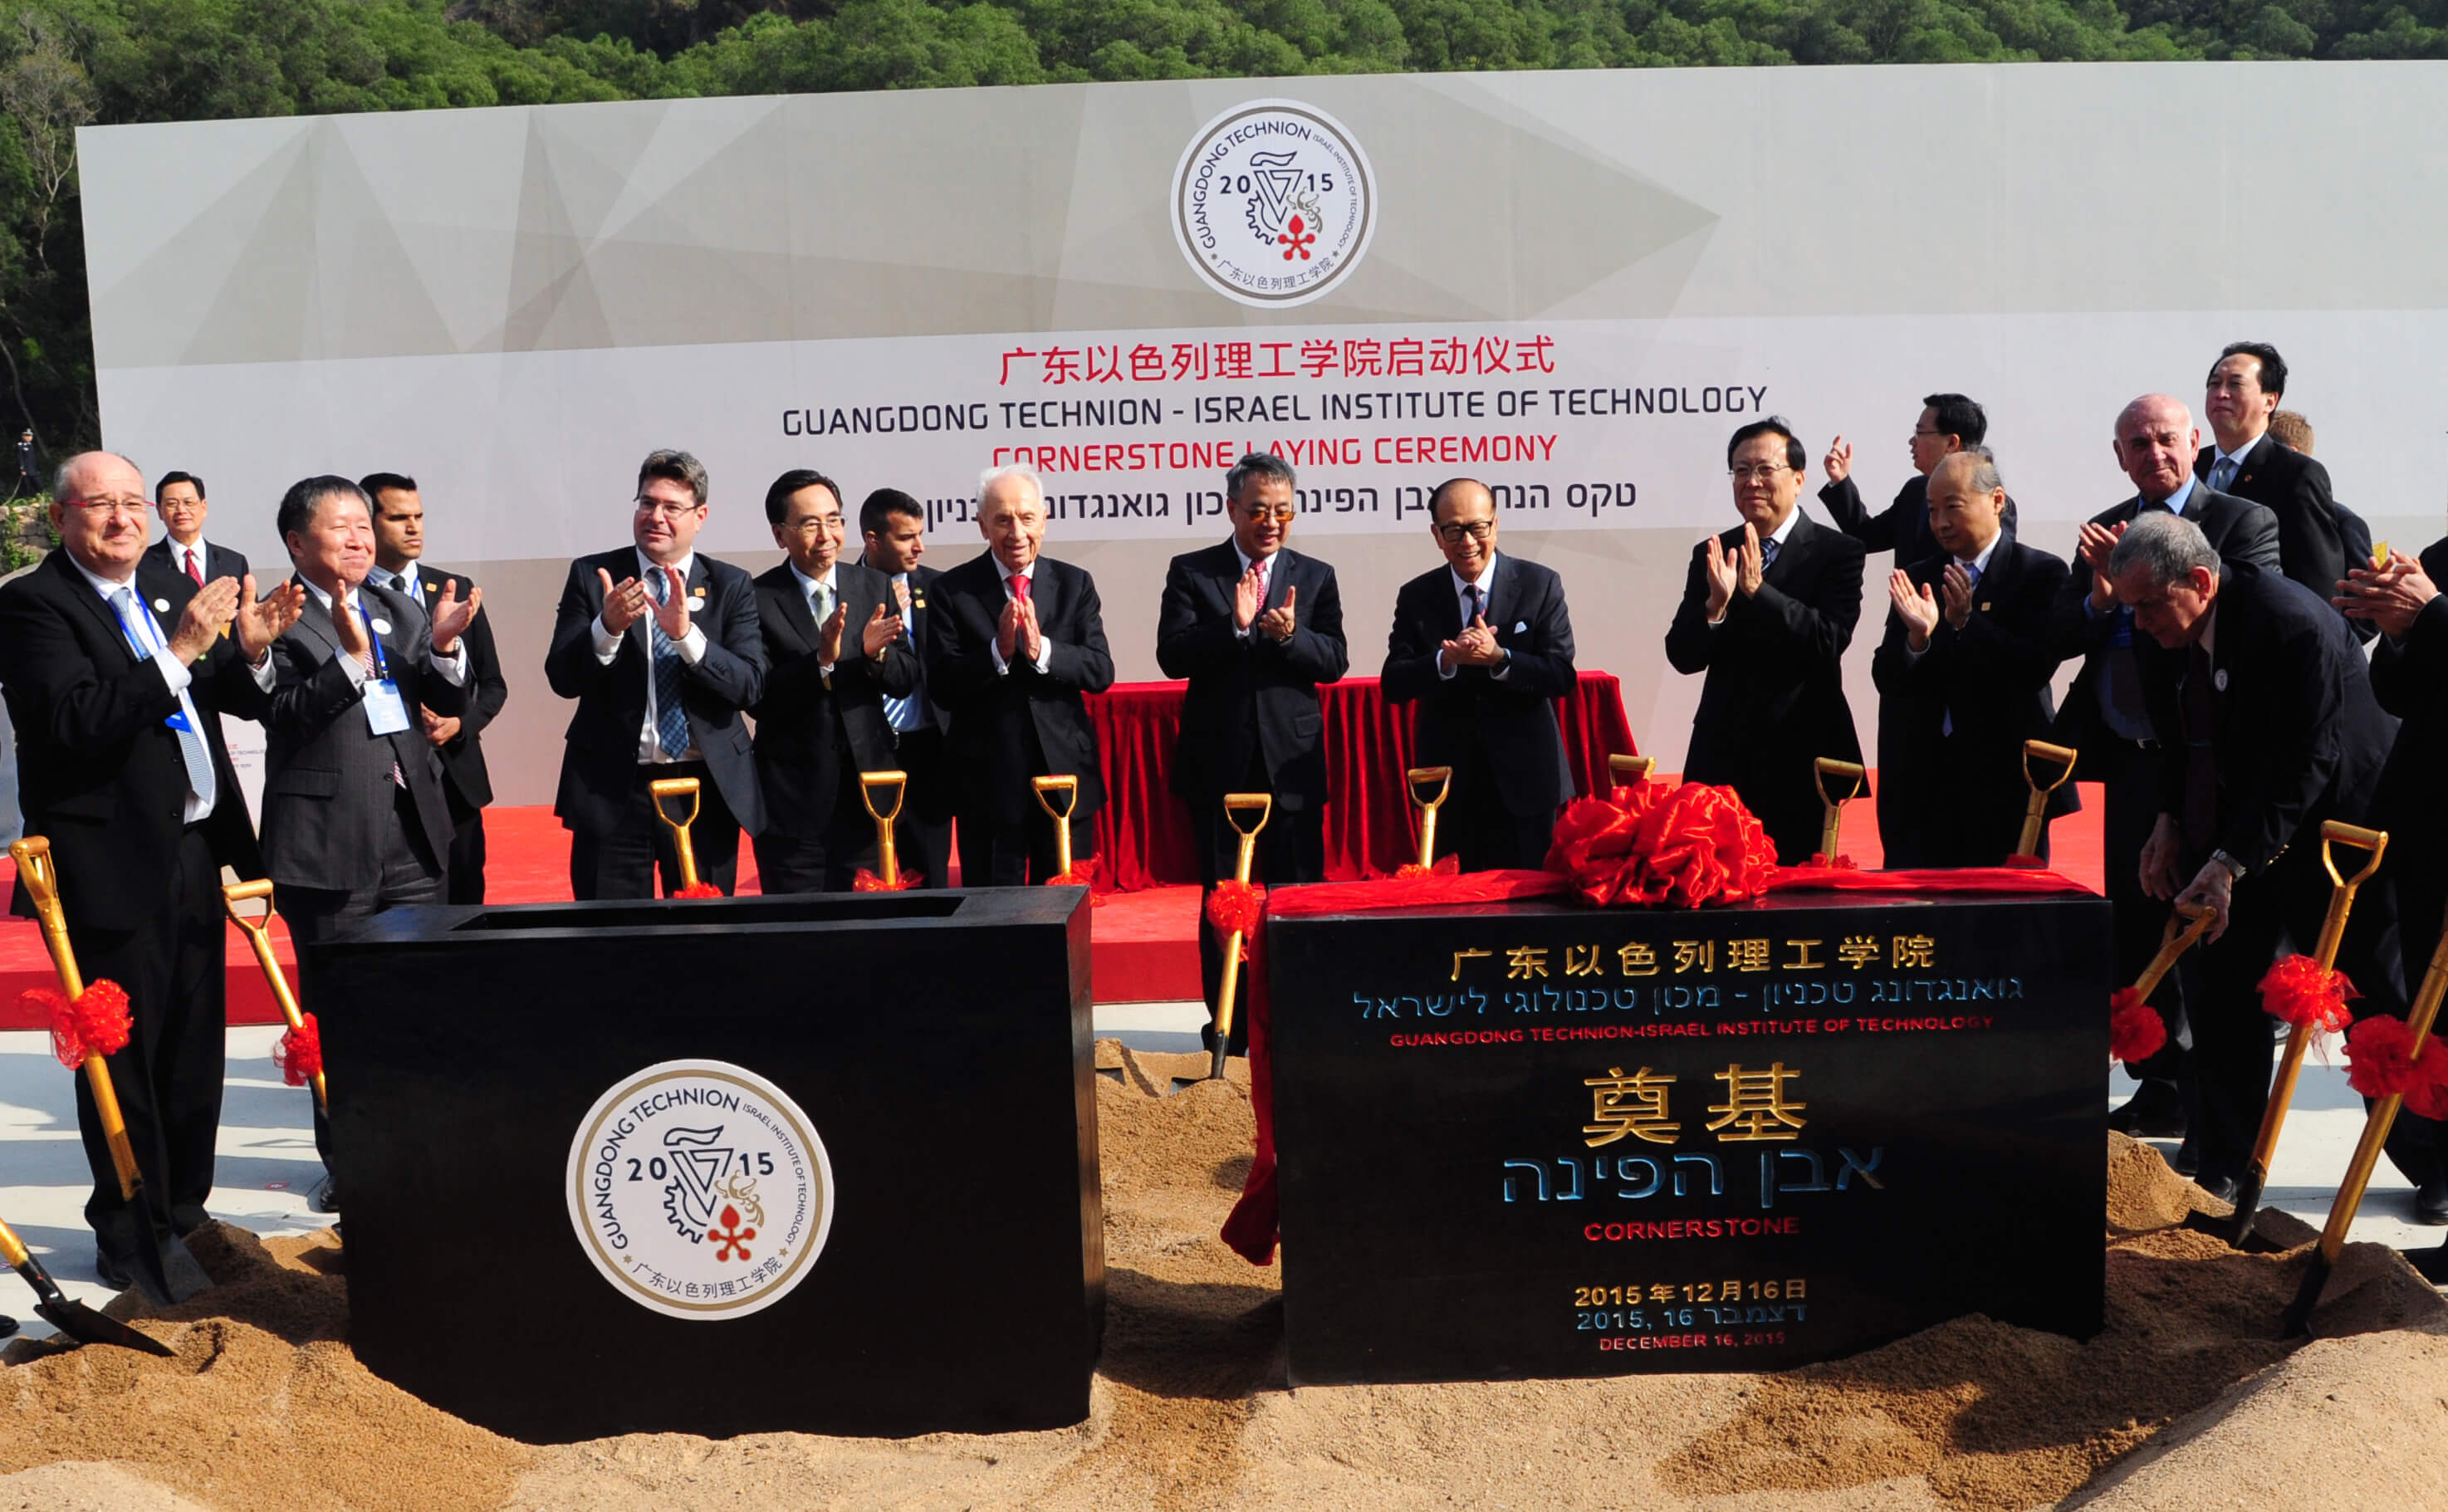 The cornerstone laying ceremony for the "Guangdong-Technion Institute", the joint venture between the Technion and Shantou University in China, 16/12/15